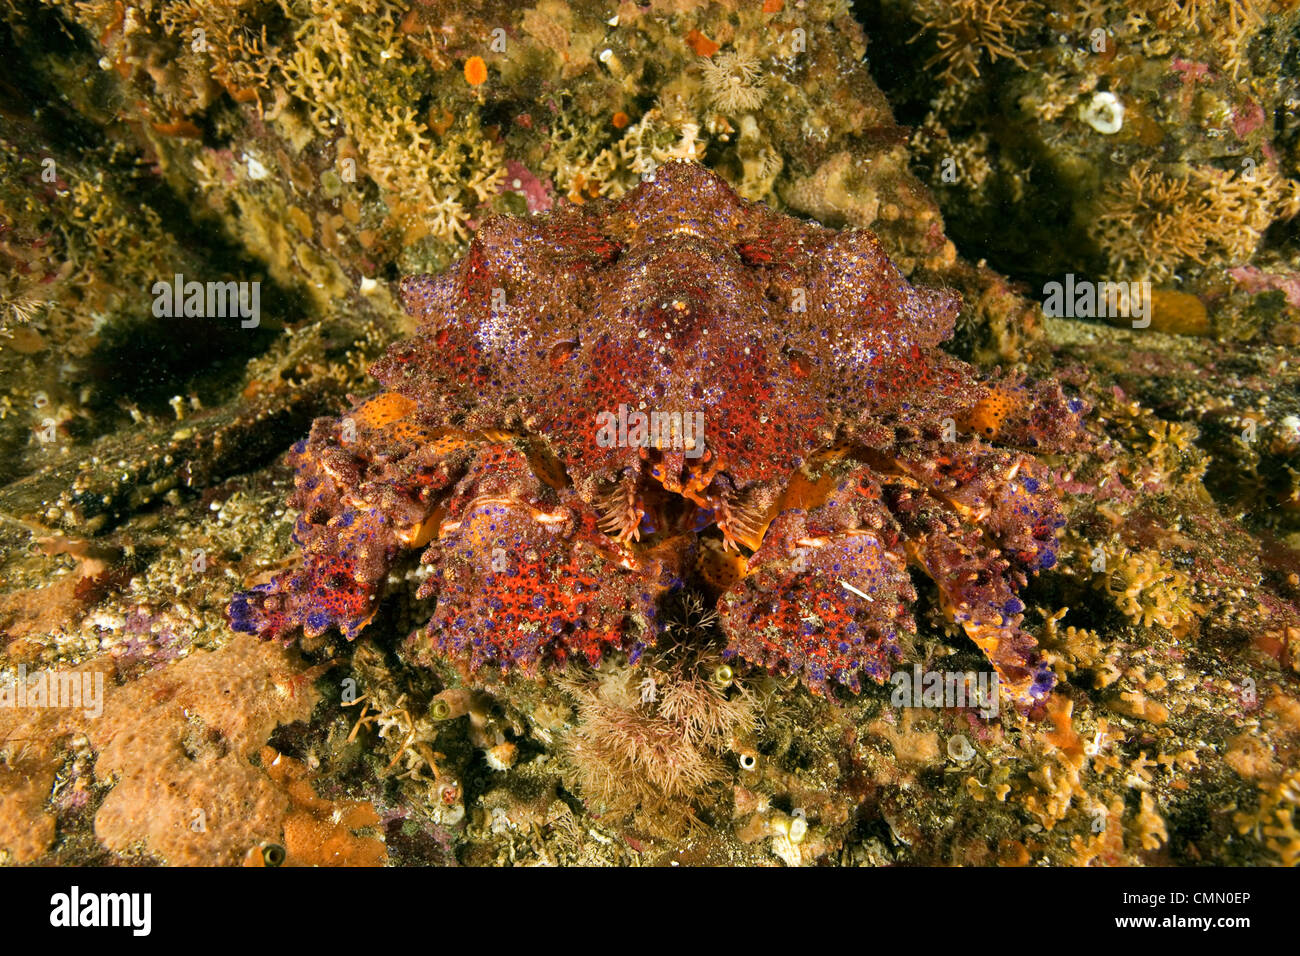 Puget Sound king crab, Alaska, United States, North Pacific Ocean Stock Photo